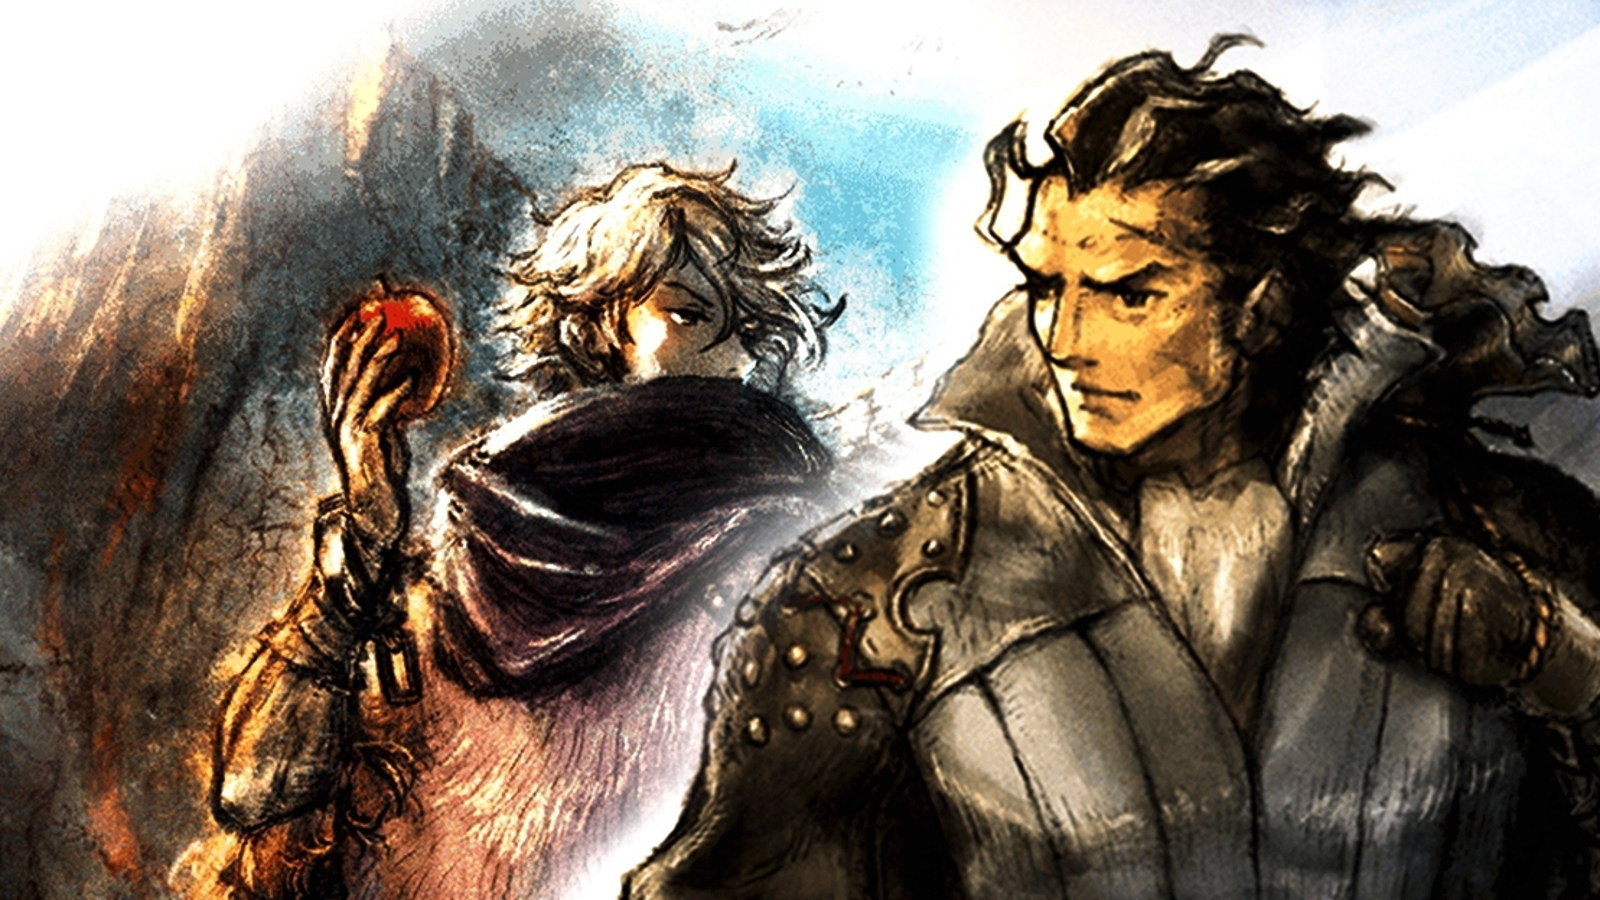 Octopath Traveler: Champions of the Continent Review